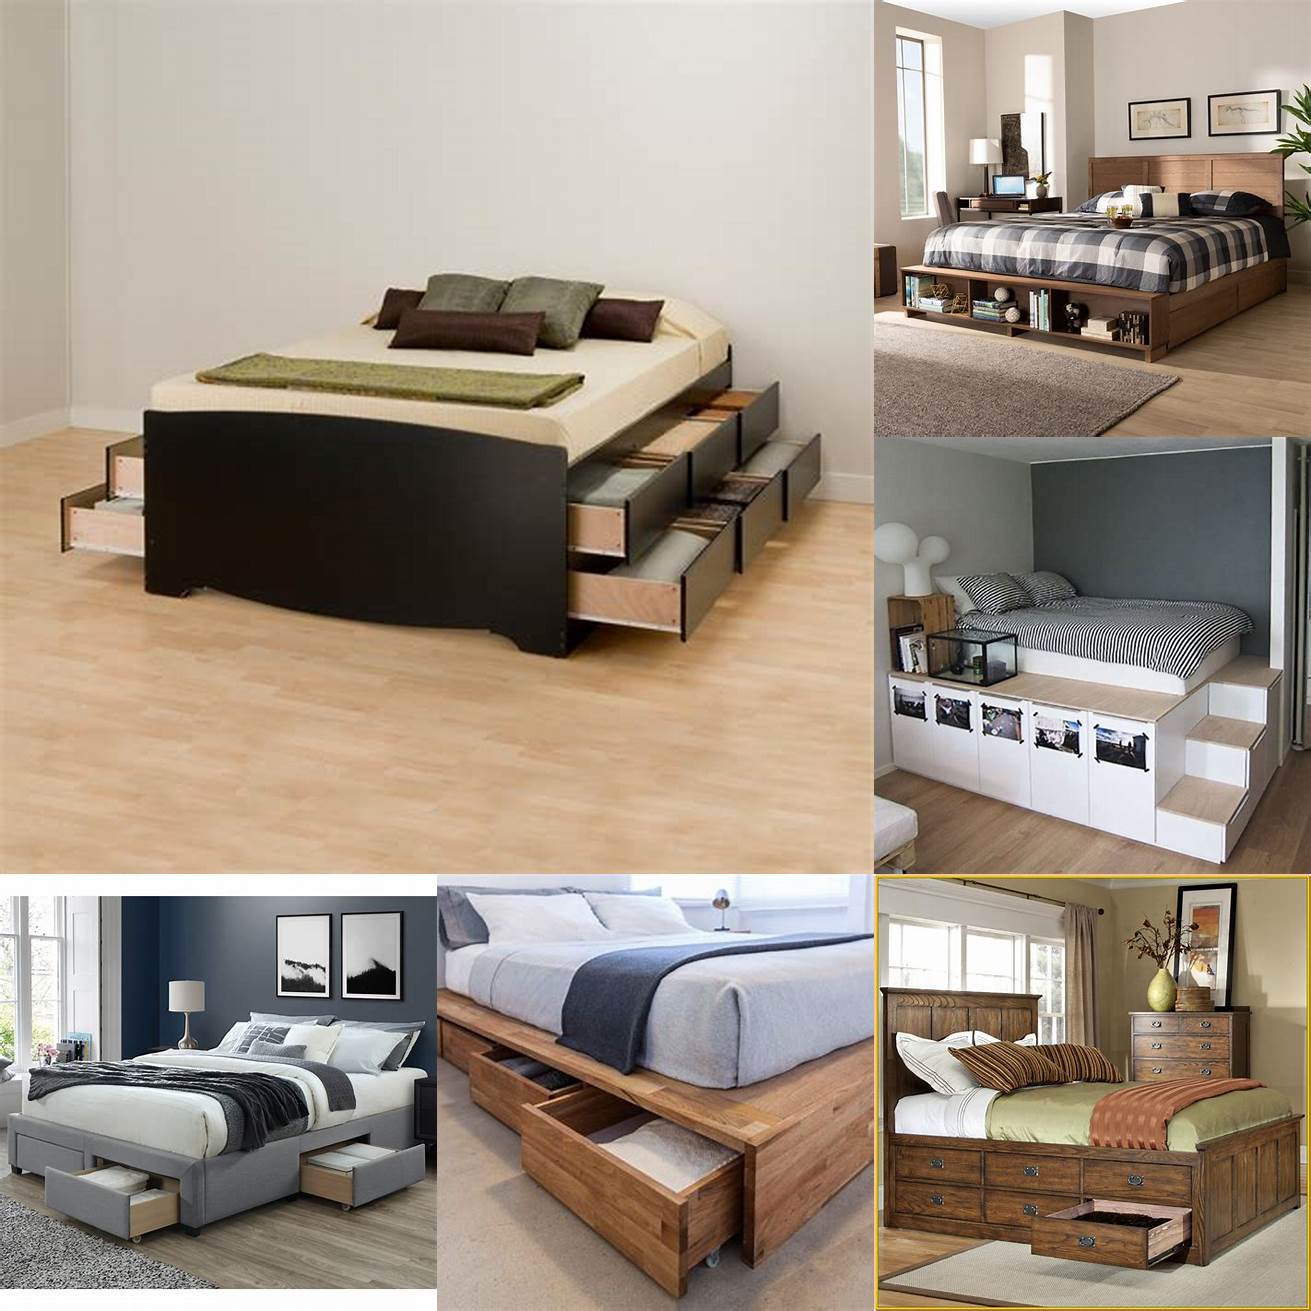 A platform bed with built-in storage drawers to maximize space